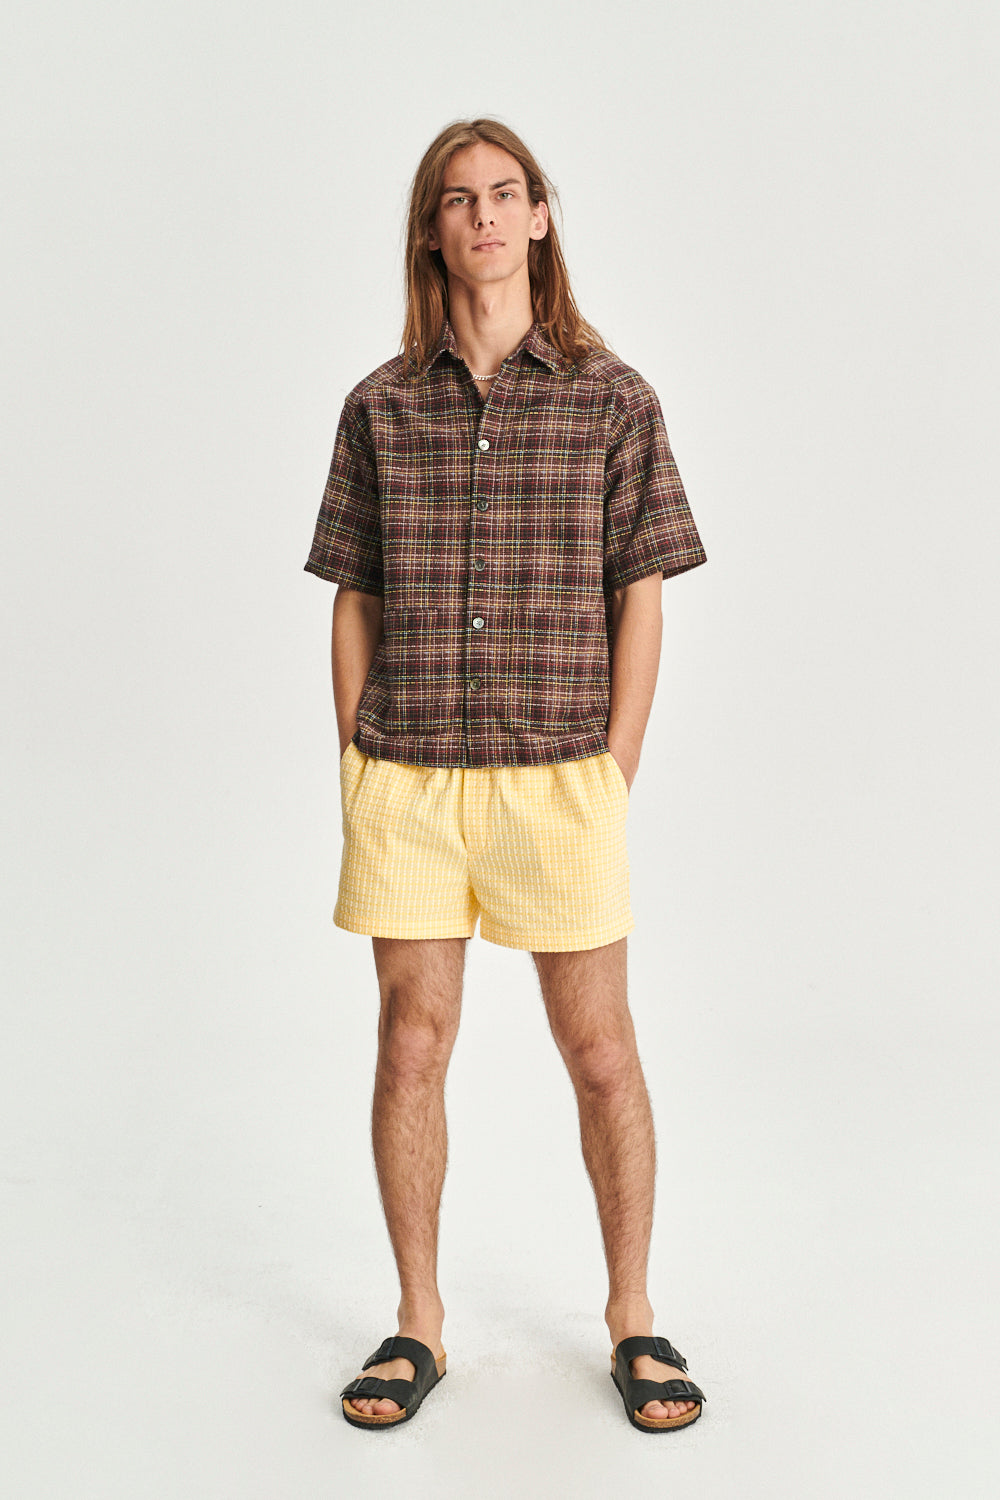 Short Sleeve Garden Shirt in a Brown, Yellow, White and Red Chequered Portuguese Cotton